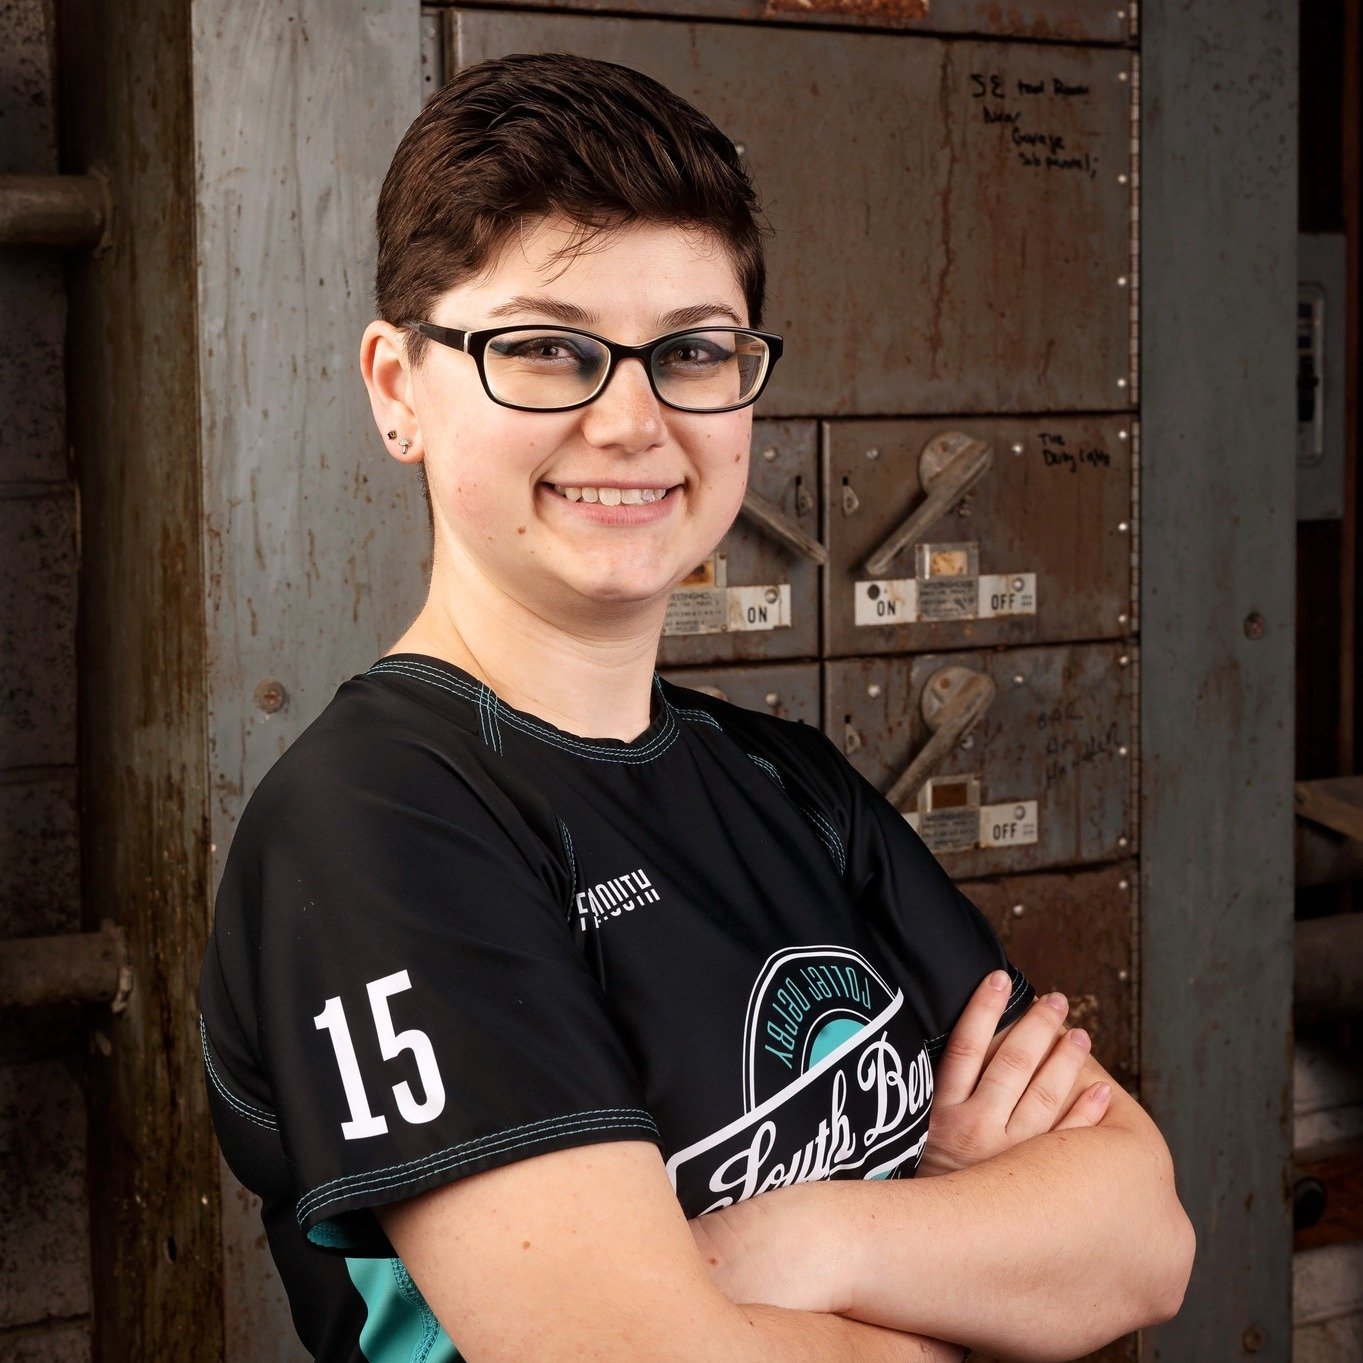 South Bend Roller Derby would like to wish #15, Novacain, a very Happy Birthday today! We hope you have a wonderful day!